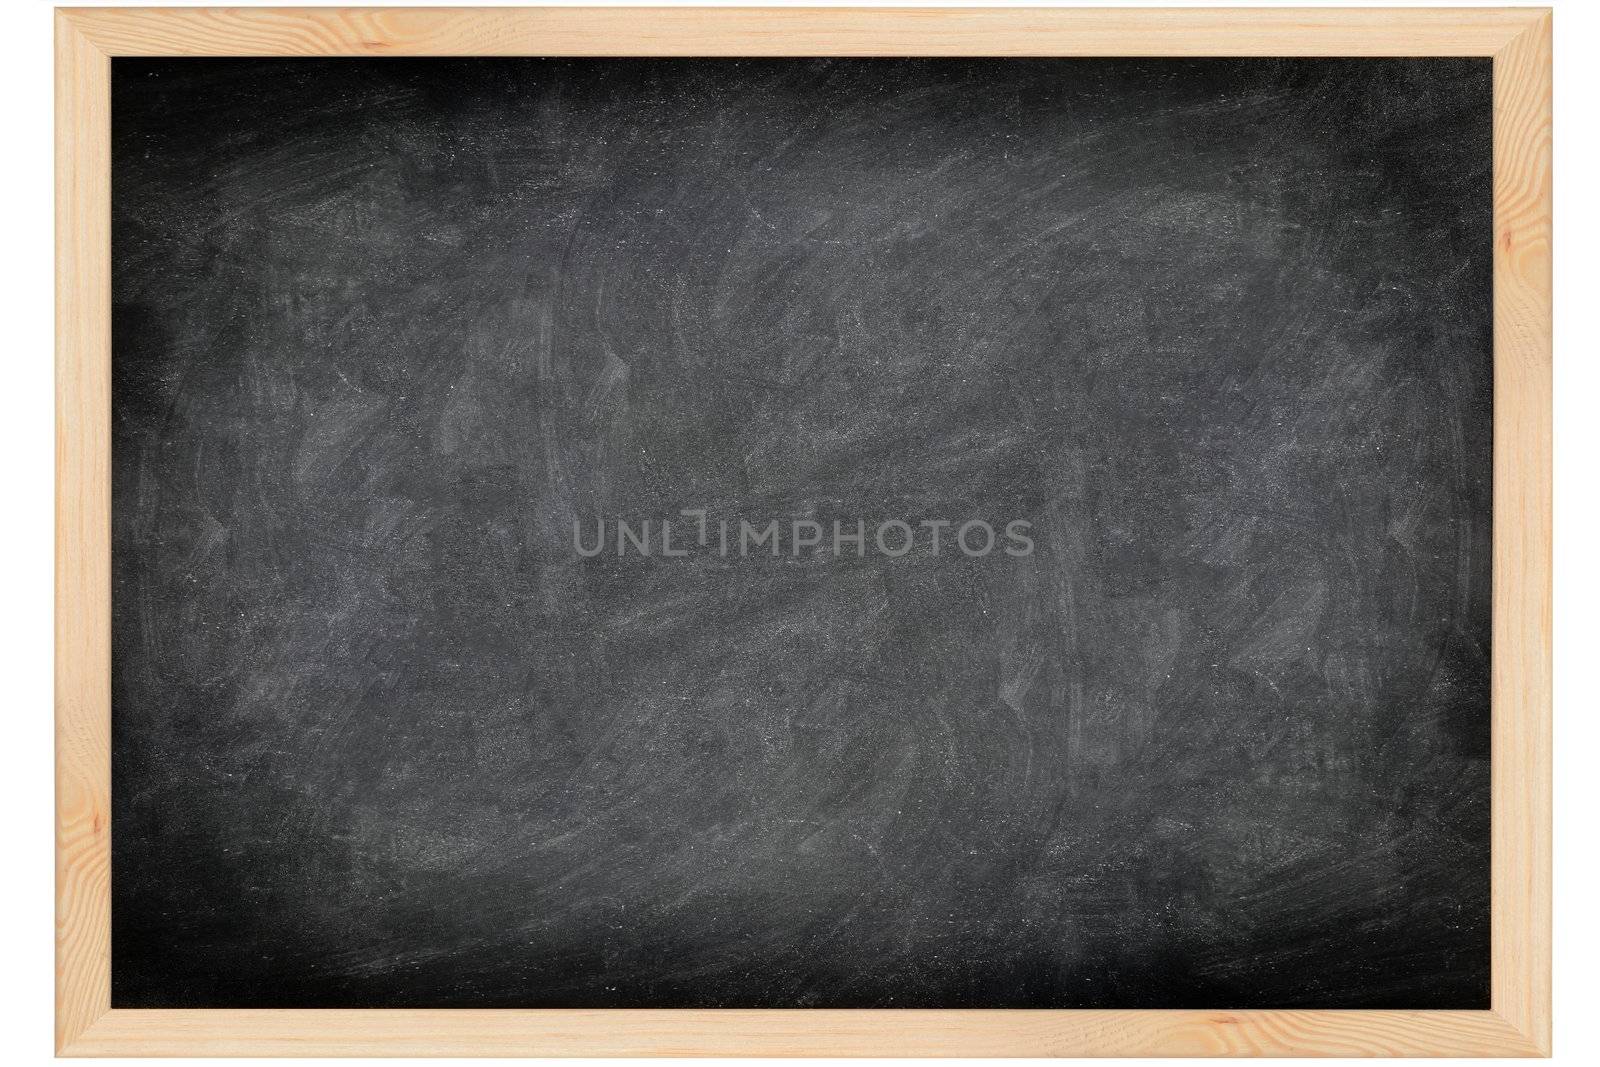 empty blackboard with wooden frame. Black chalkboard background with great texture and scratches isolated on white background.